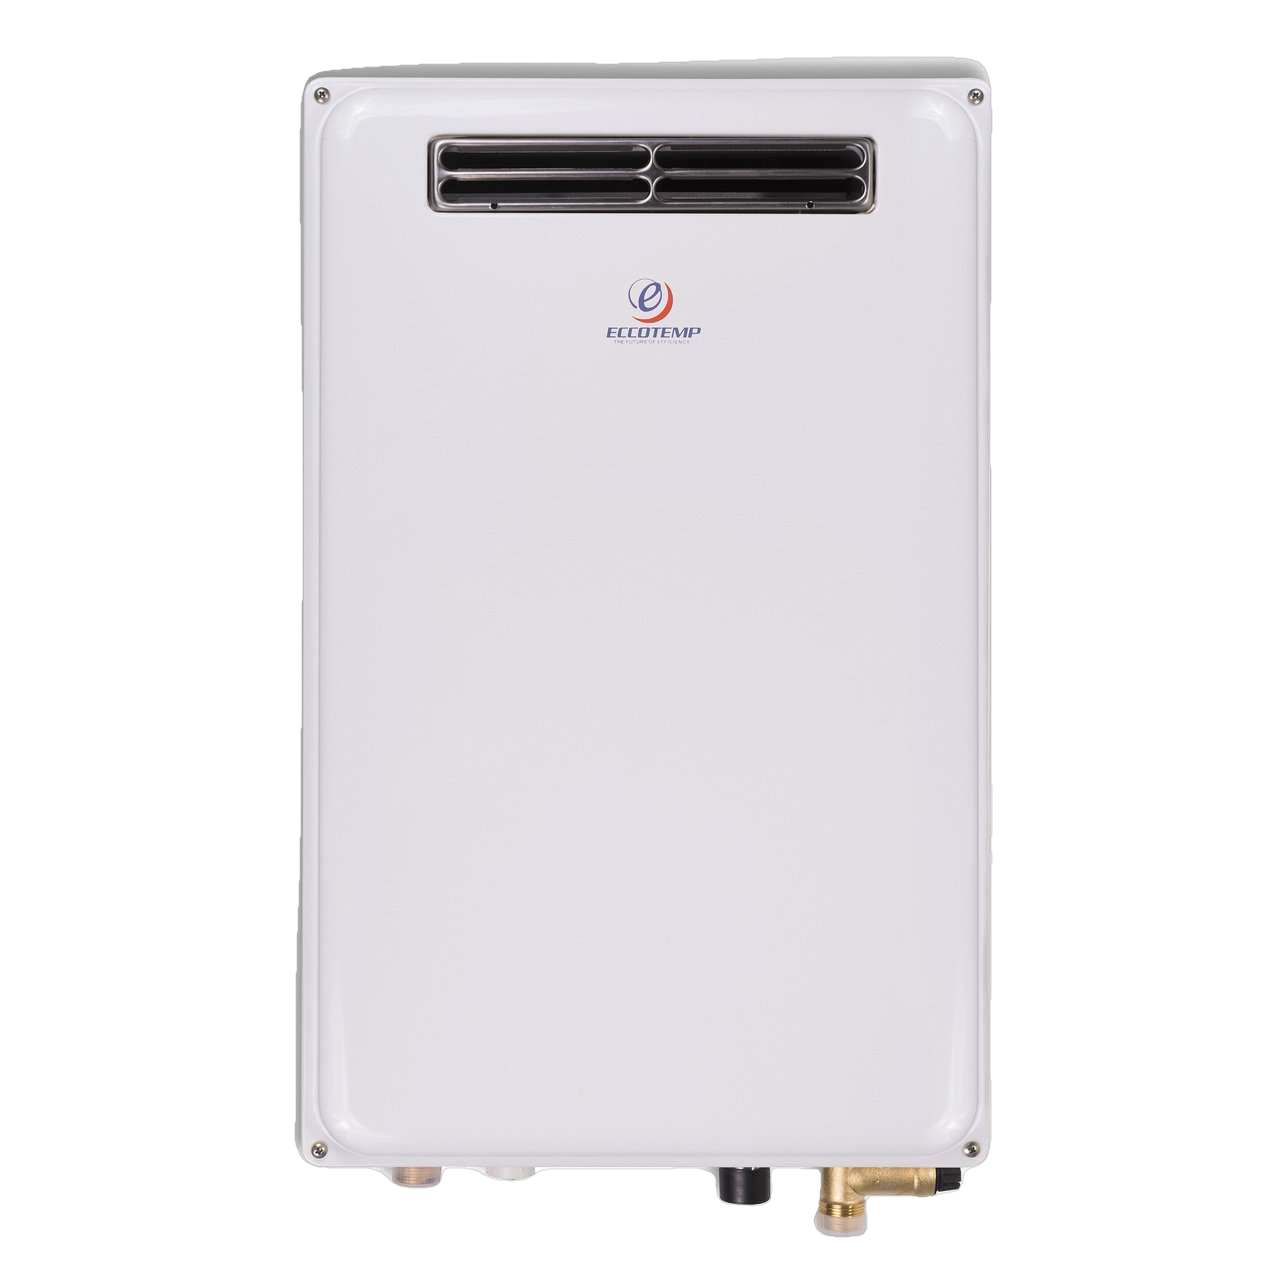 Eccotemp 45H-LP 6.8 GPM Outdoor Propane Tankless Water Heater Manufacturer RFB